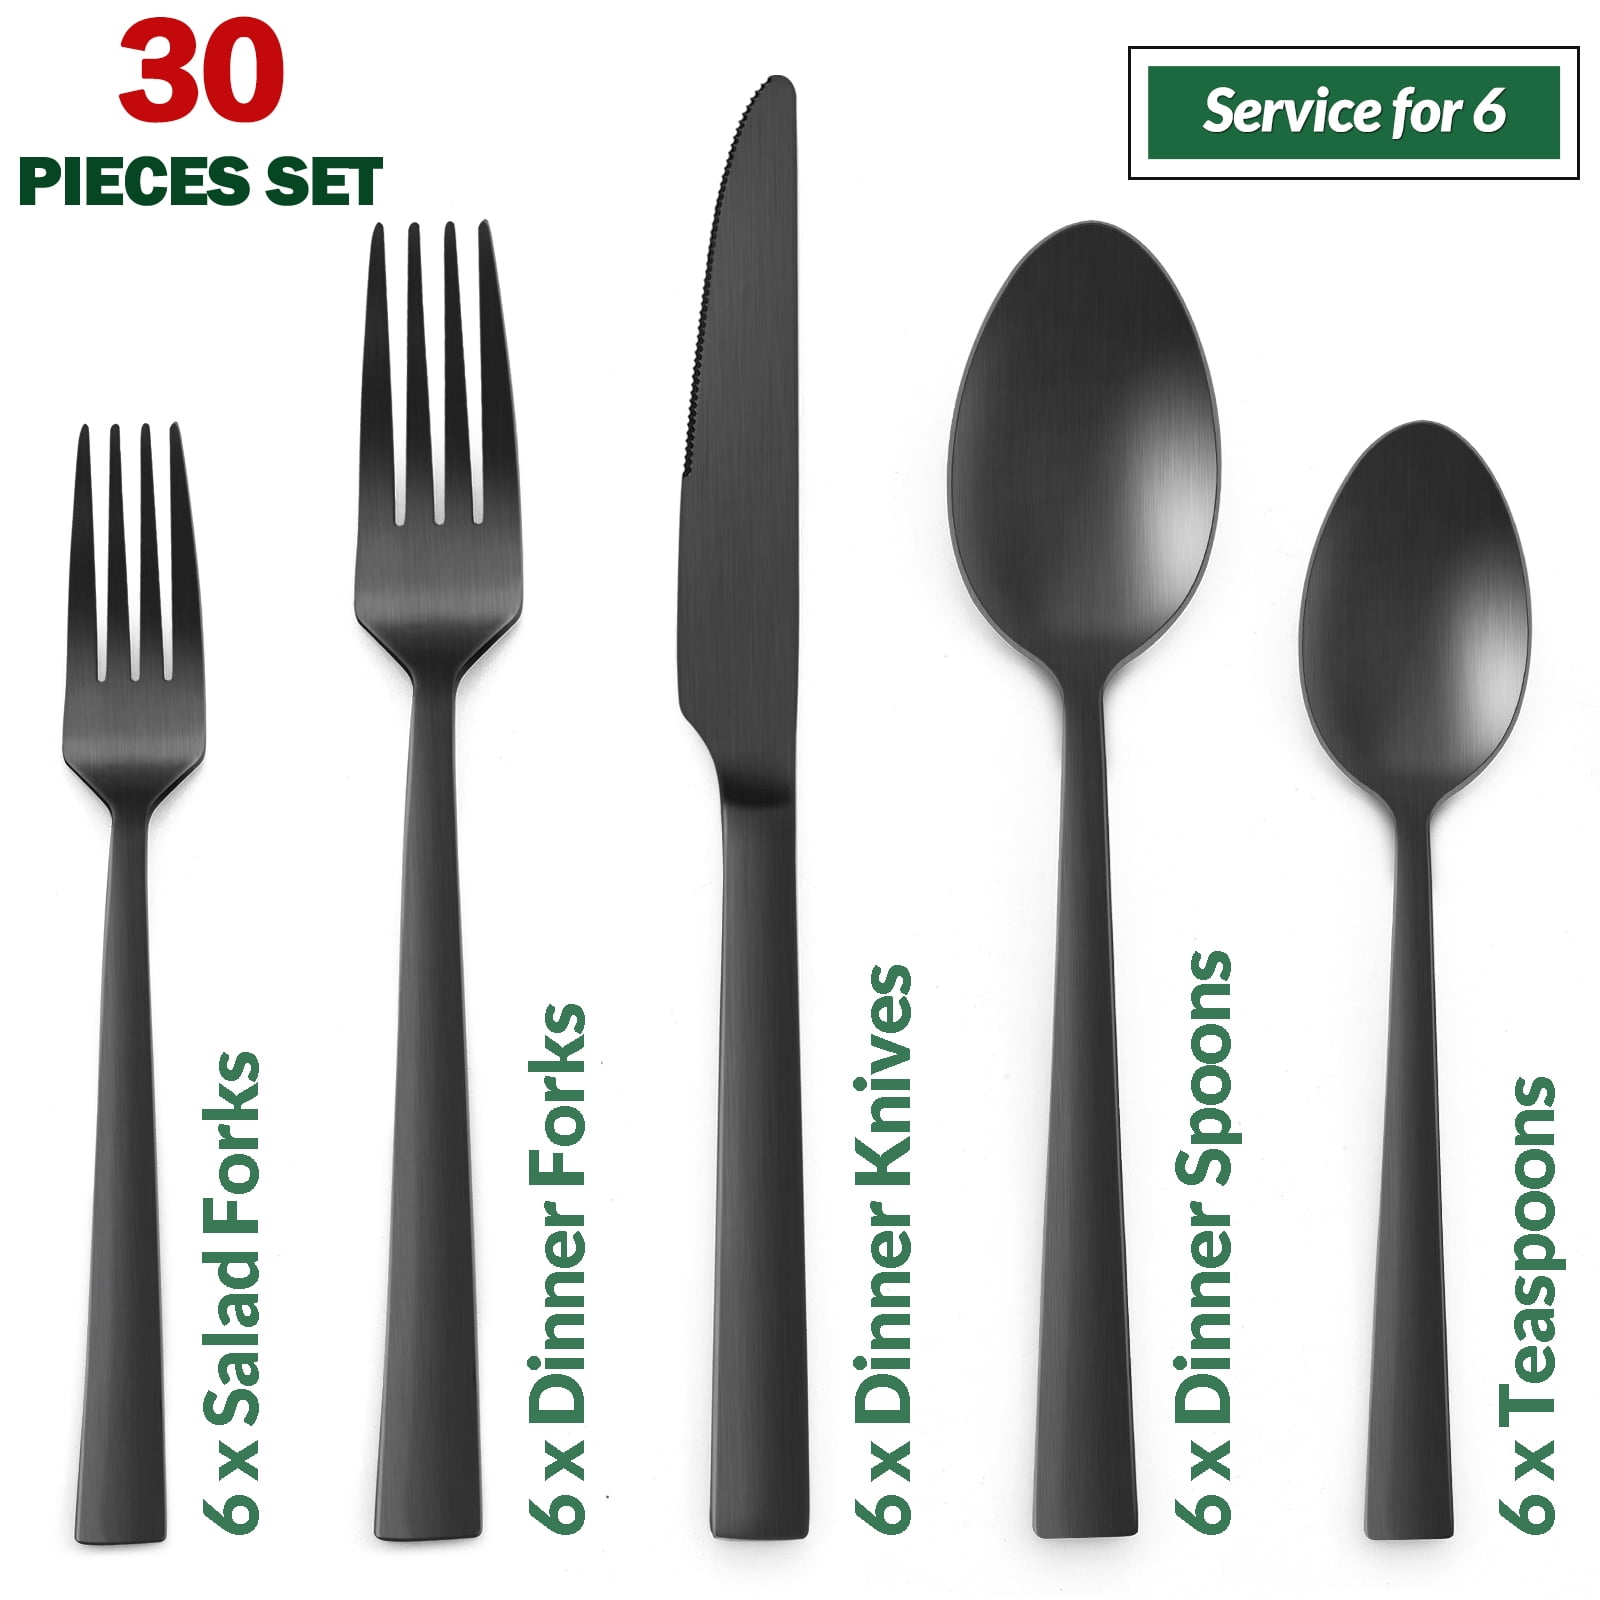 KINGSTONE Black Silverware Set, 40 PCs Black Flatware Set for 8, 18/10  Stainless steel Cutlery Set for Home Kitchen and Restaurant(Black, 40  pieces